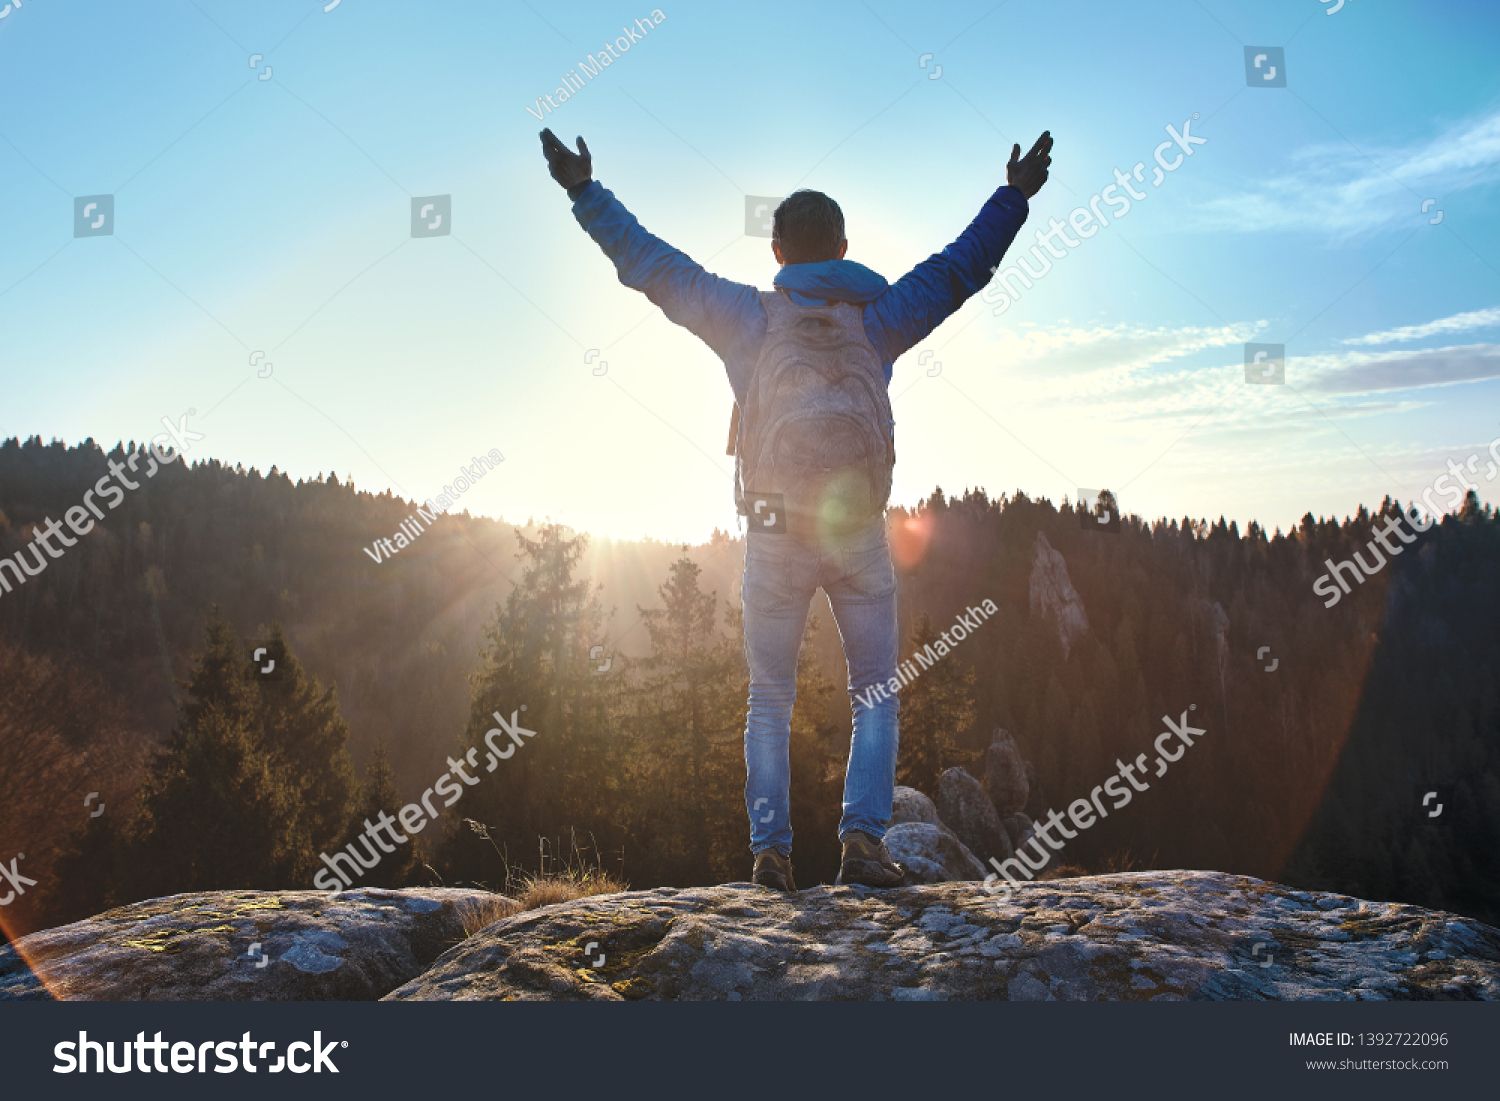 Male traveler standing on the cliff against wooded hills and cloudy sky at sunrise. Man stands hands up, greeting the sun. Adult tourist with backpack looking to misty hilly valley below. Location #1392722096